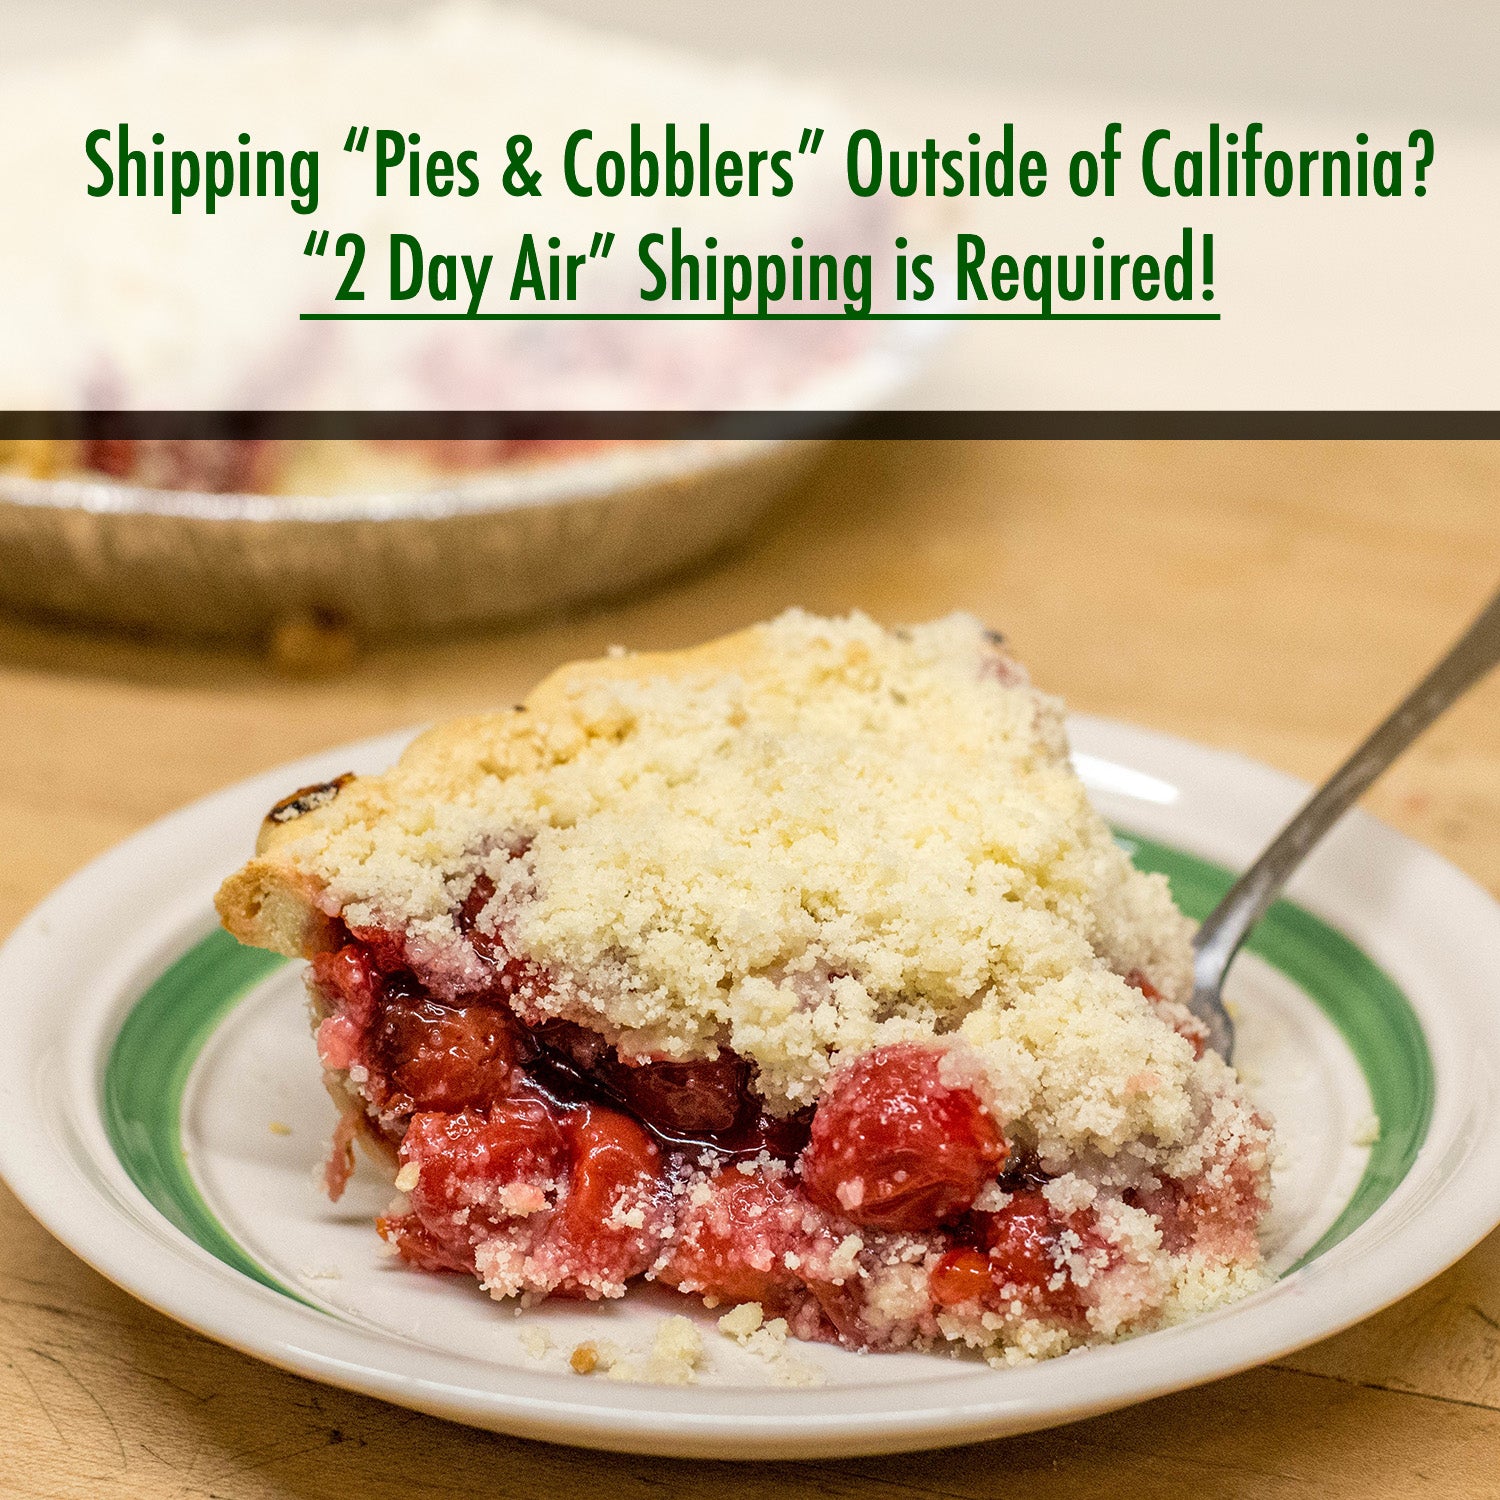 Cherry Cobbler, if shipping outside of california, 2 day air shipping required